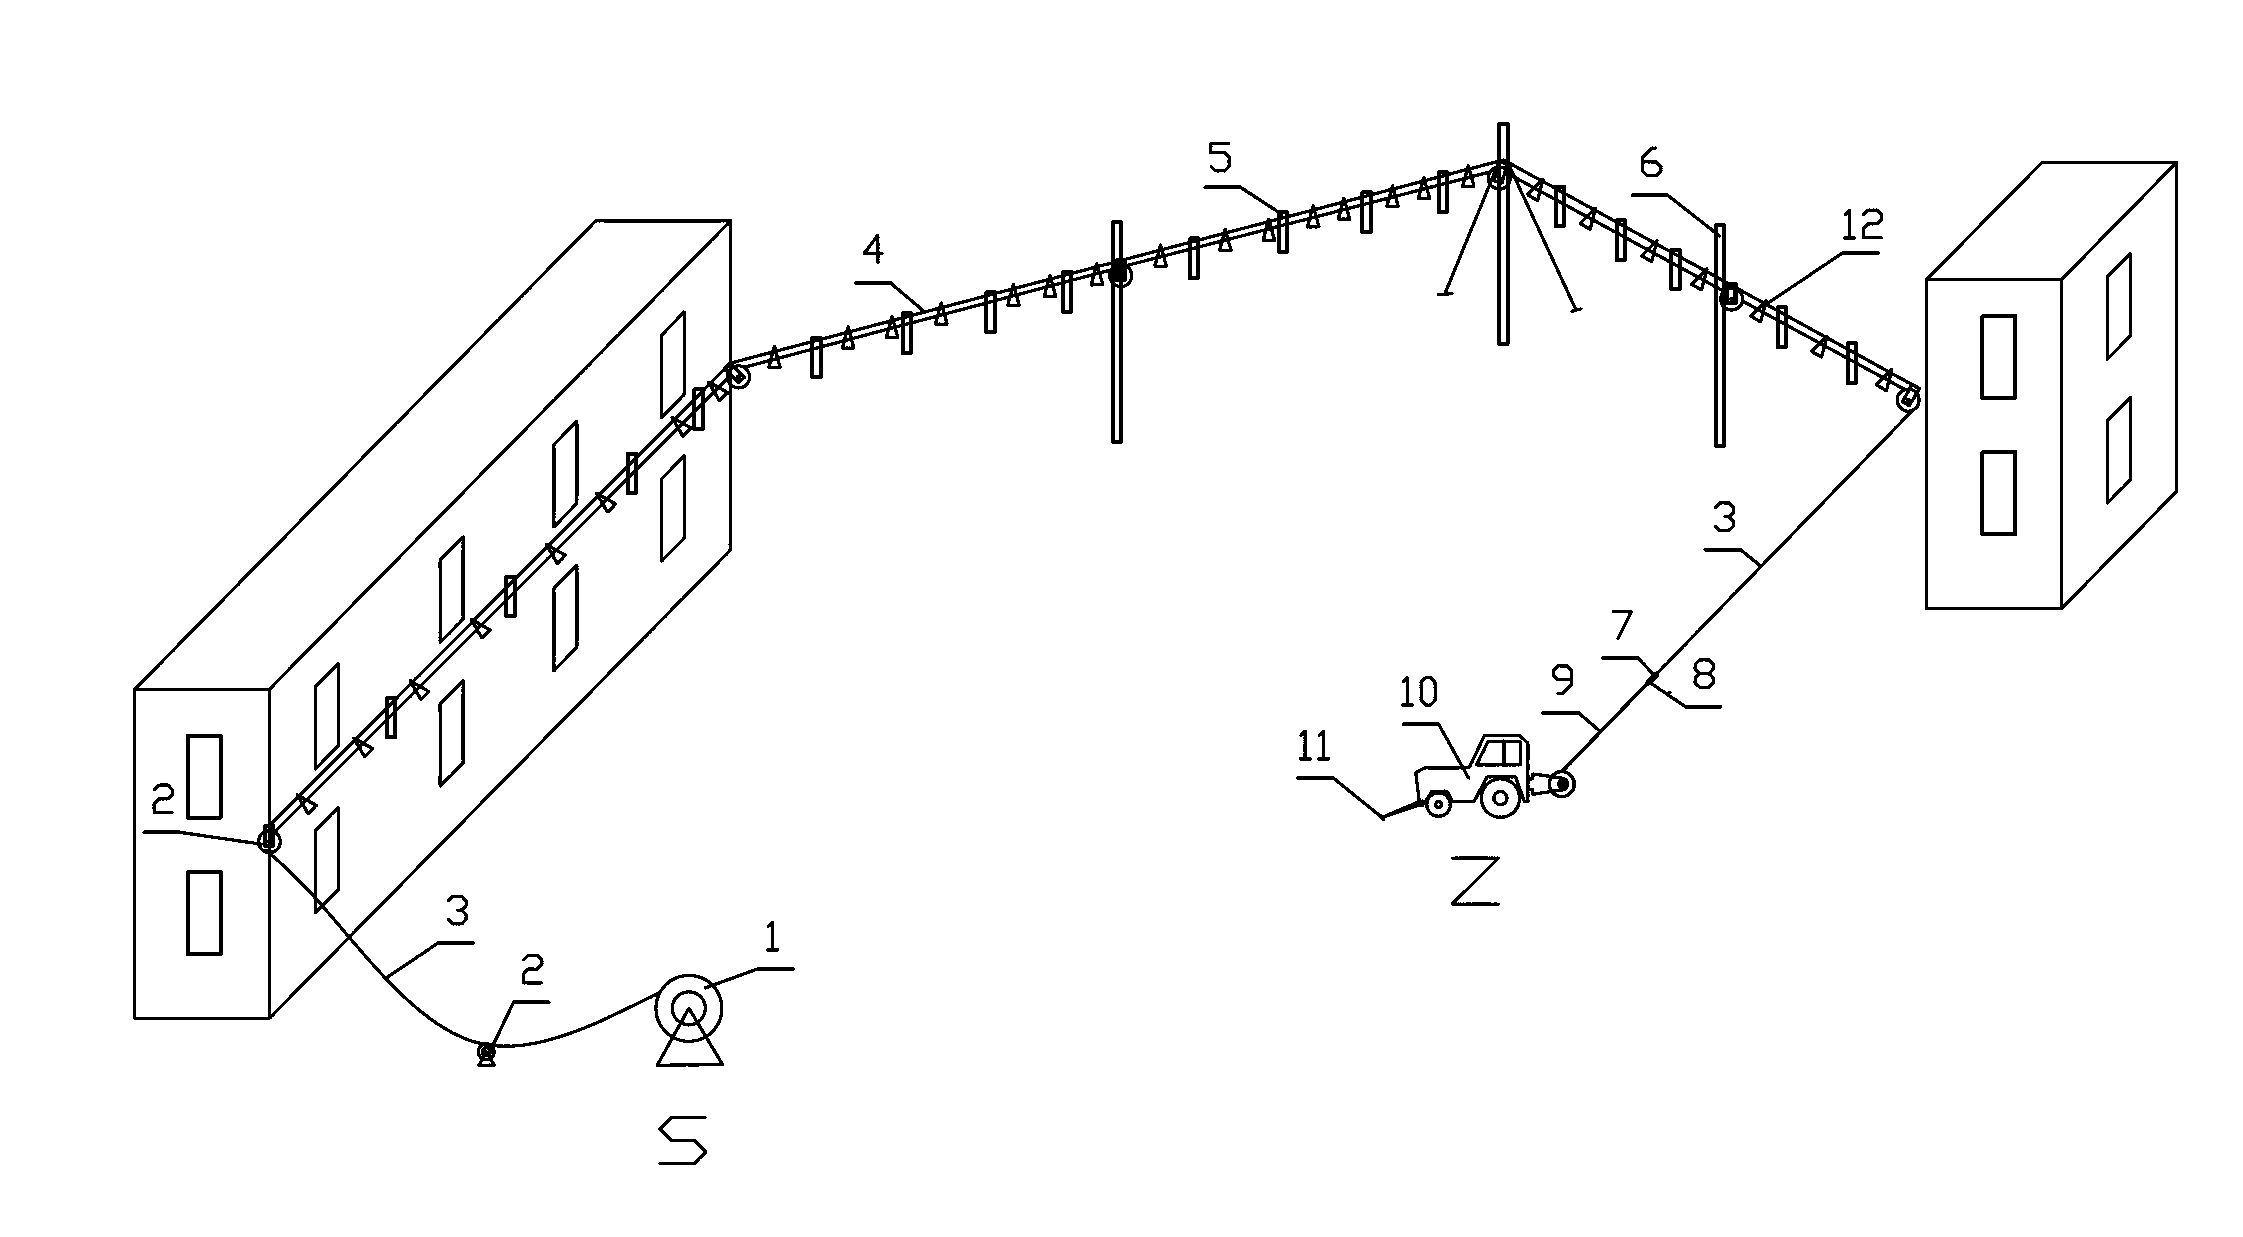 Mechanical laying method for large-section overhead cable